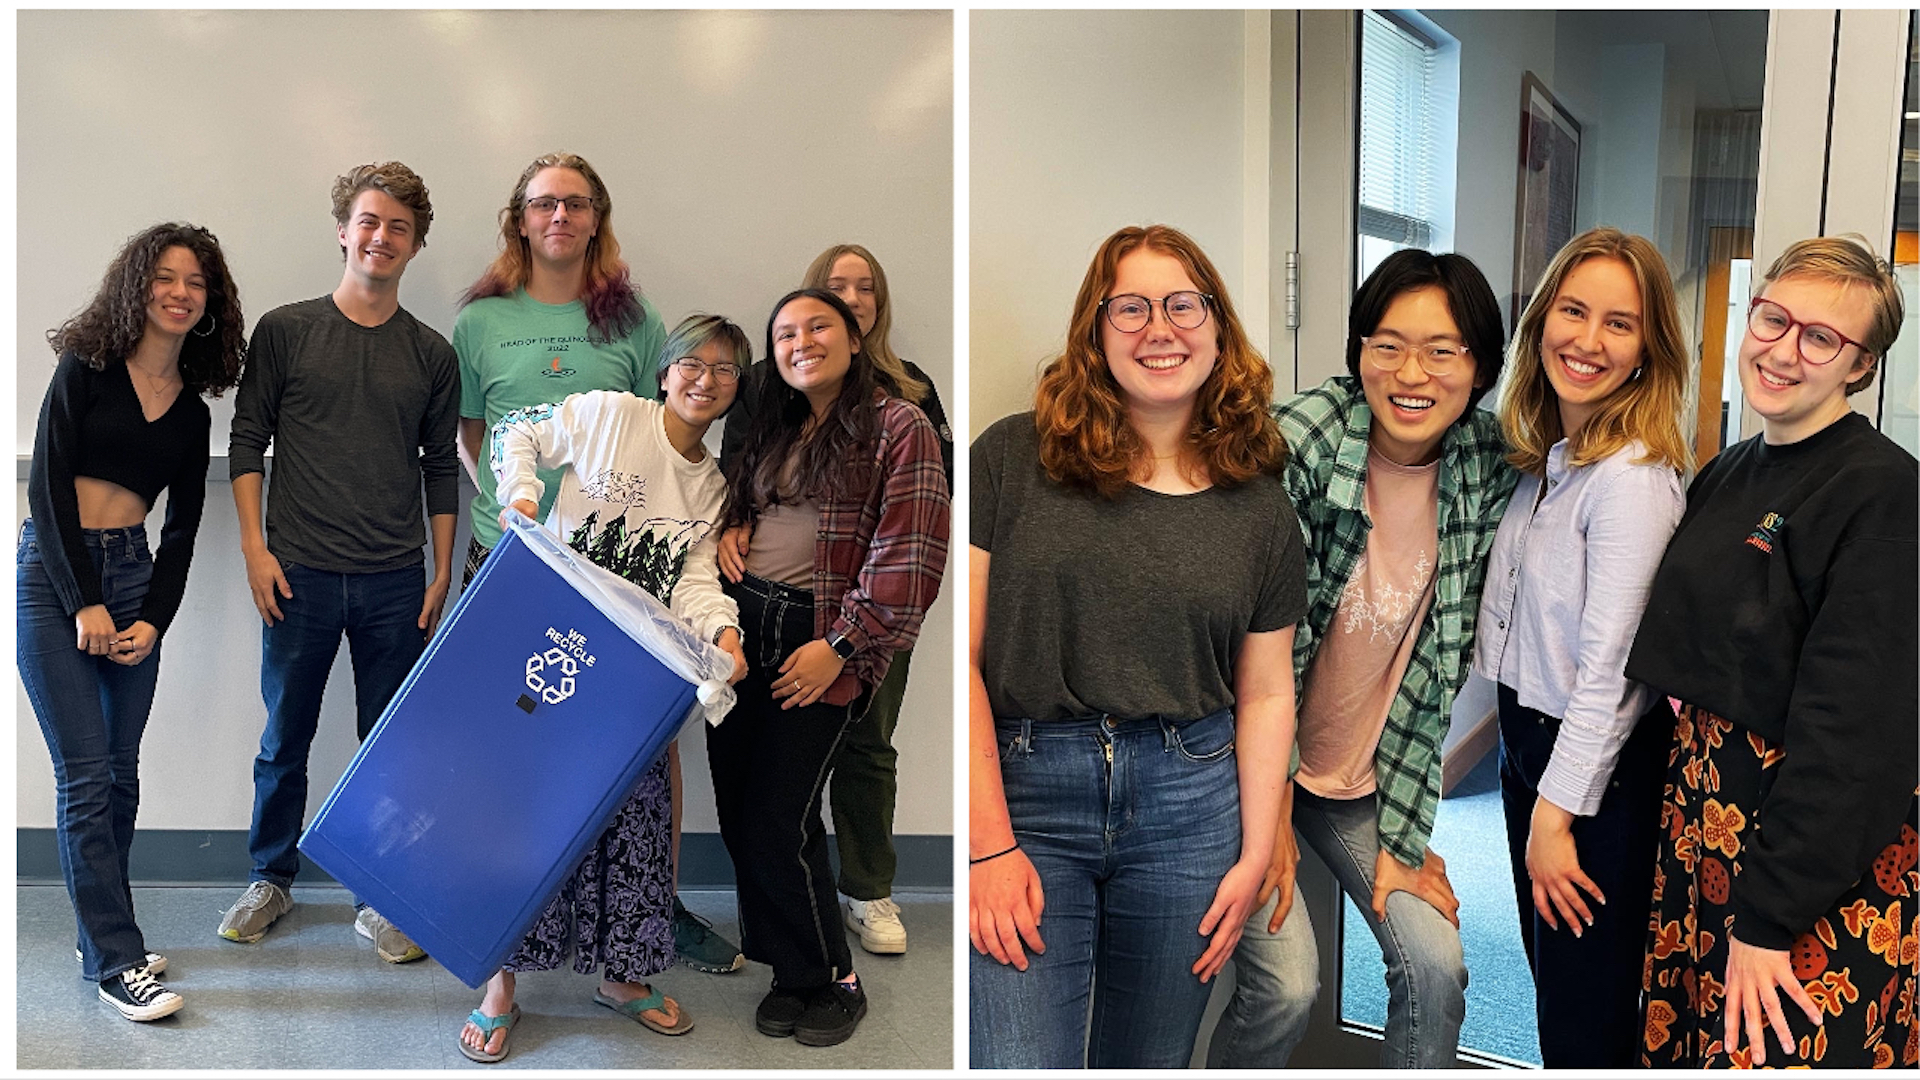 (L to R): Students from the Environmental Consulting at Olin (ECO) course pose for a photo. ECO Team member, Camden Droz '26 was out on the day the photo was taken. On the right, the team from Change at Olin are pictured after giving their presentation.